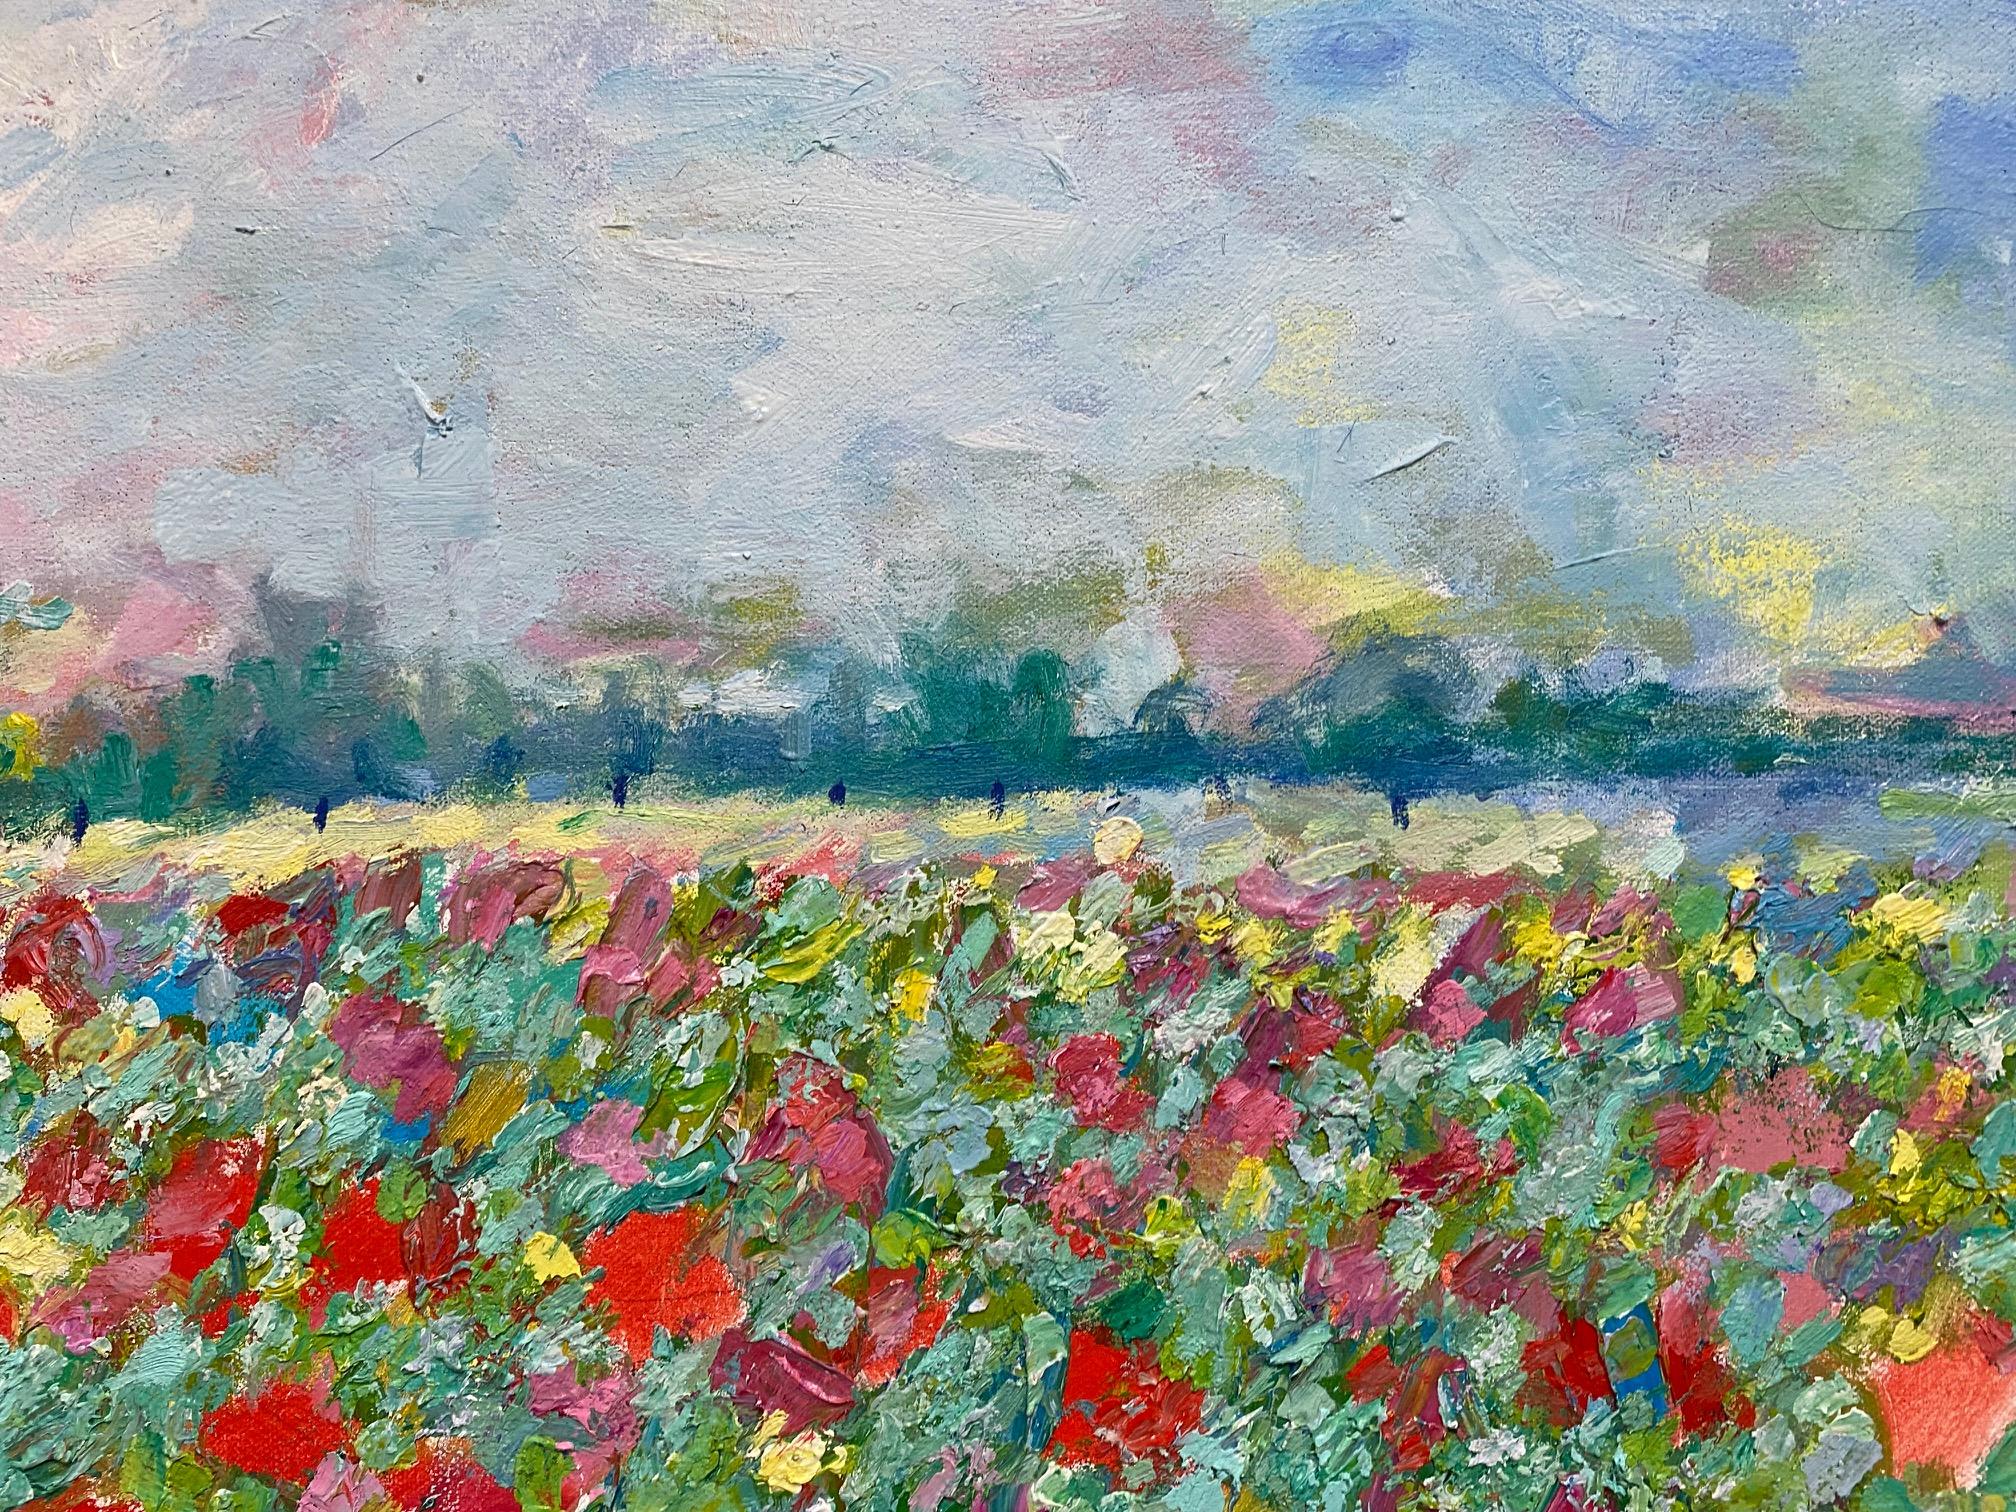 Homestead of Flowers, original 30x40 contemporary French impressionist landscape - Contemporary Painting by Eugene Maziarz